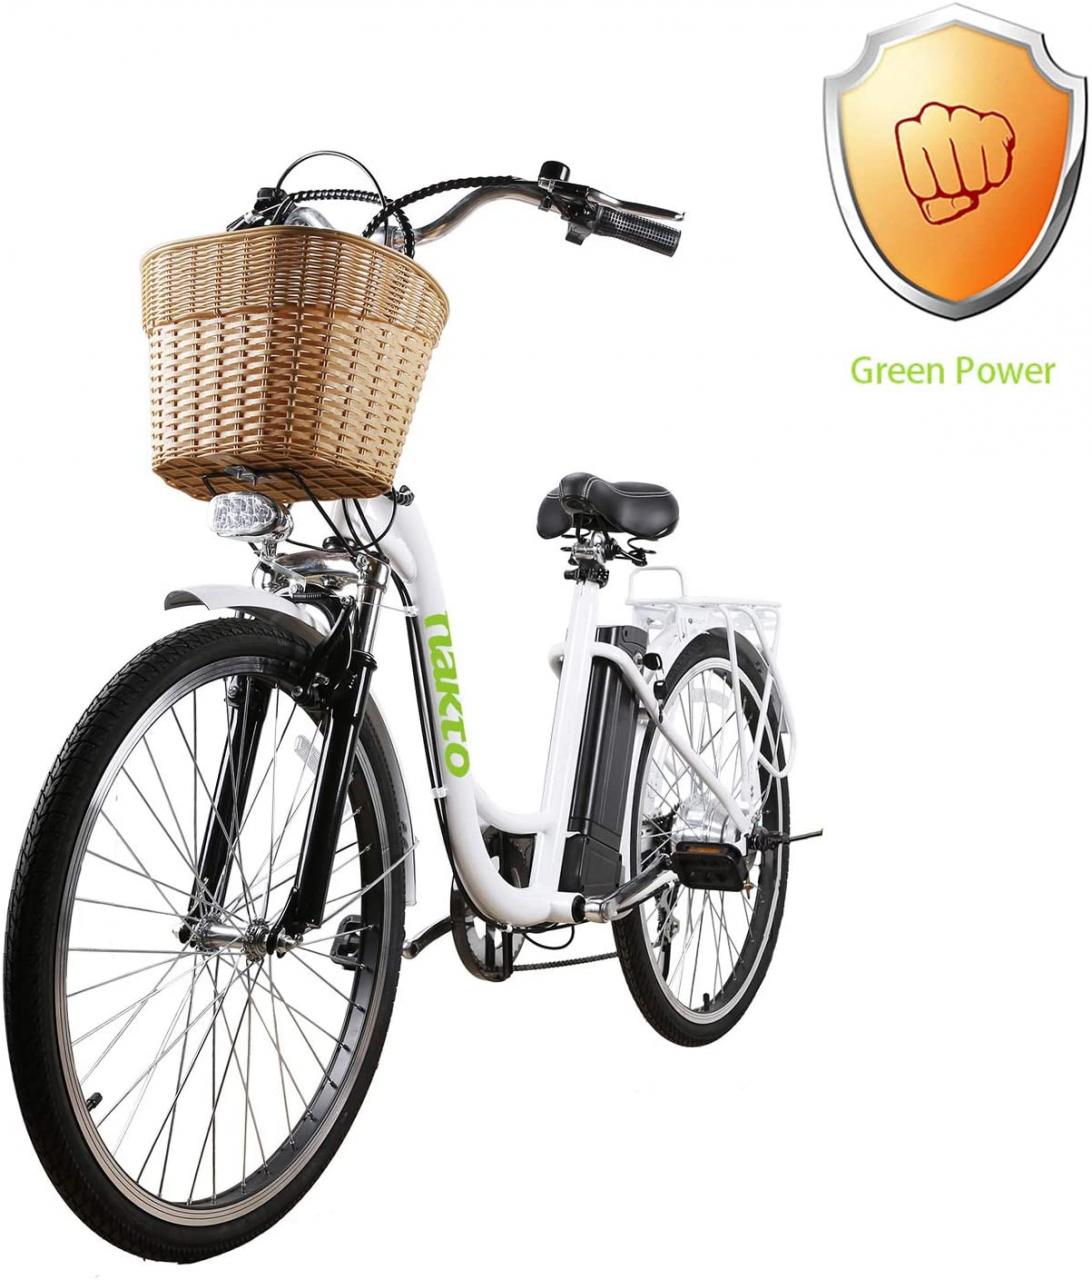 Buy City Electric Bike for Women, 22 Nakto 250W Elegance City Ebike for  Adult Female Electric Bicycle with 36V 10Ah Lithium Battery&hellip Online  in Vietnam. B099W2QBLF